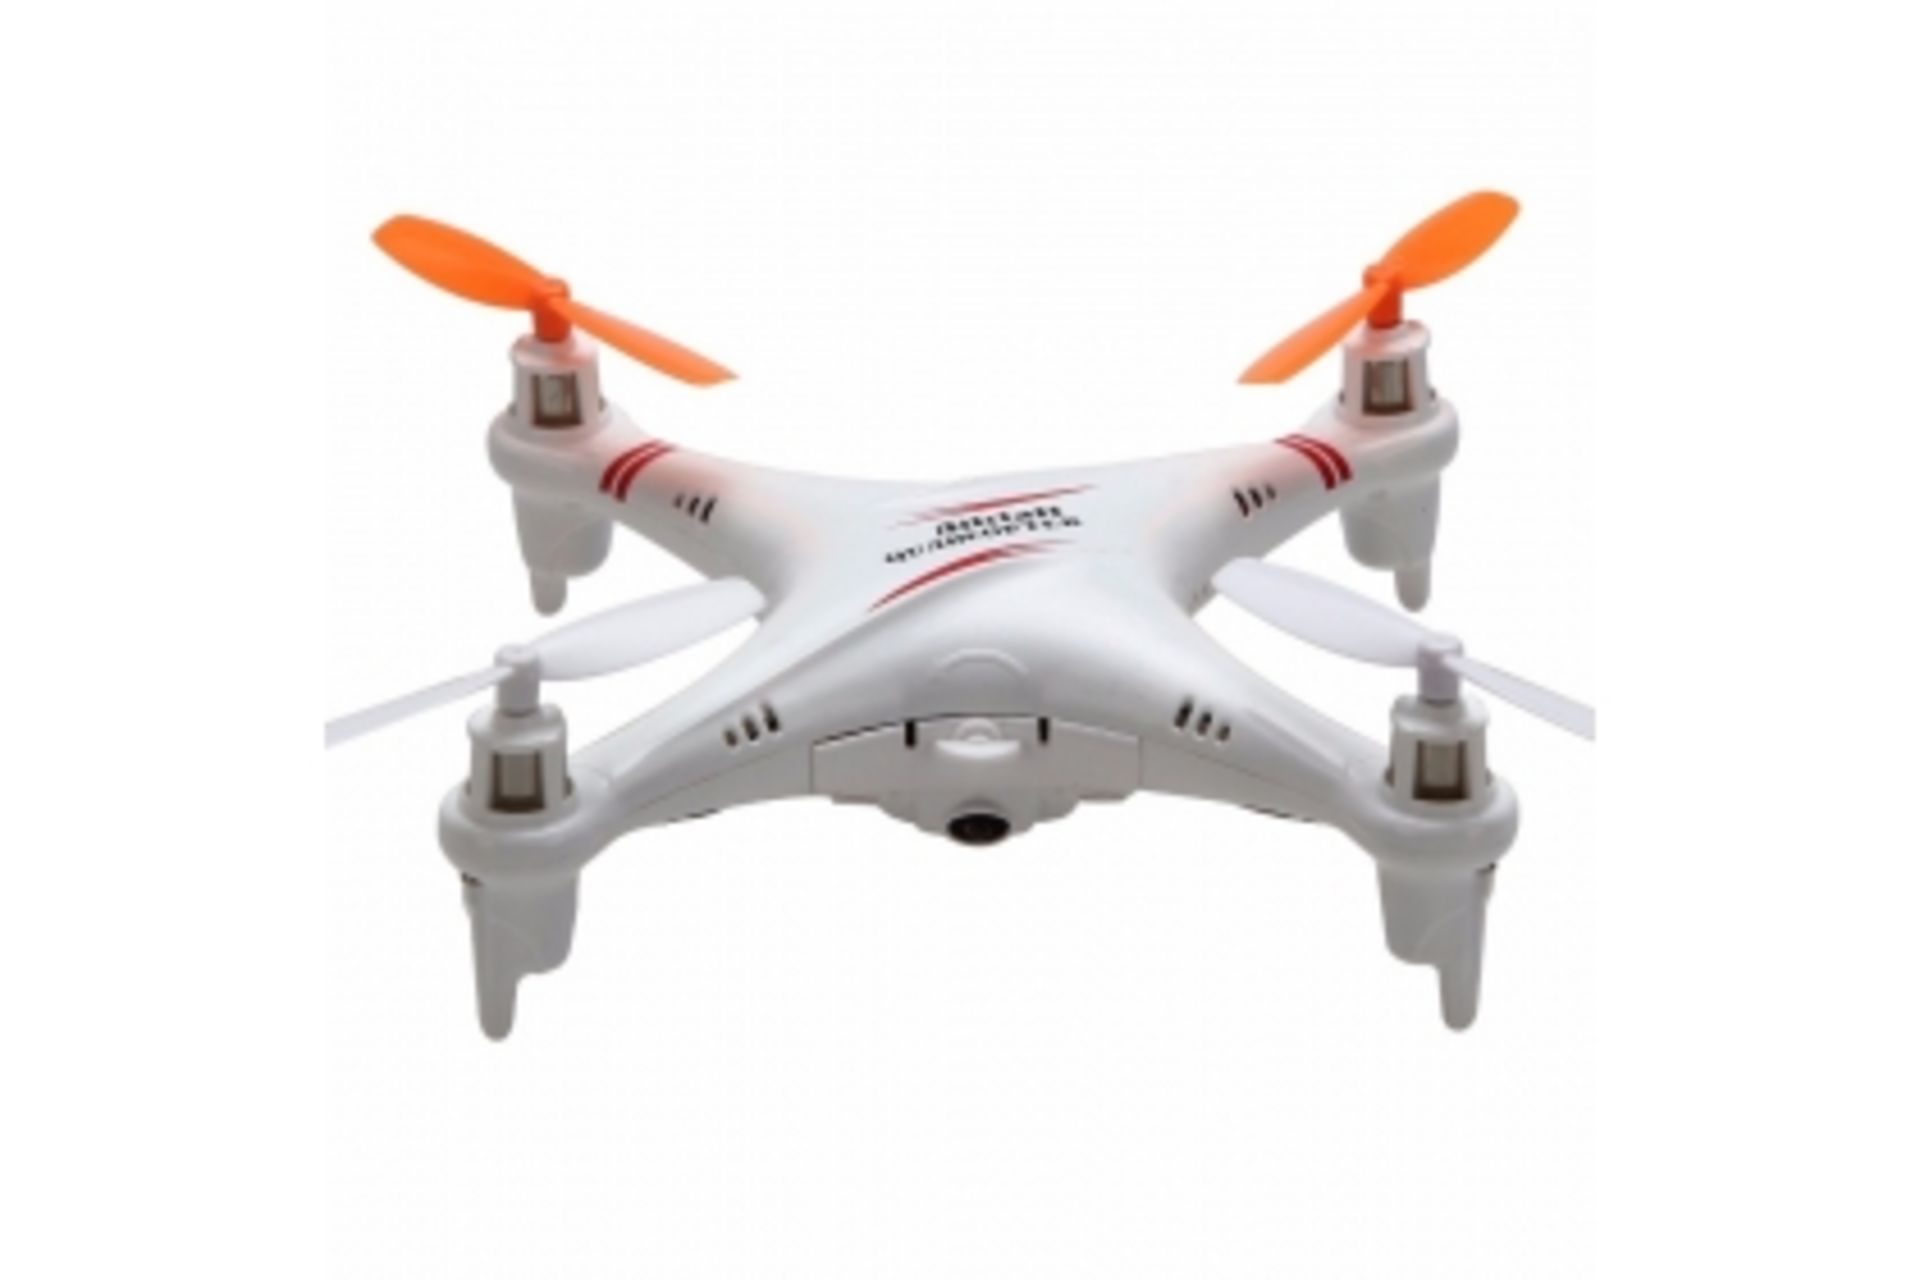 V Brand New Skytech M62R Quadcopter With Camera ISP £39.99 (Halfords) X 2 Bid price to be multiplied